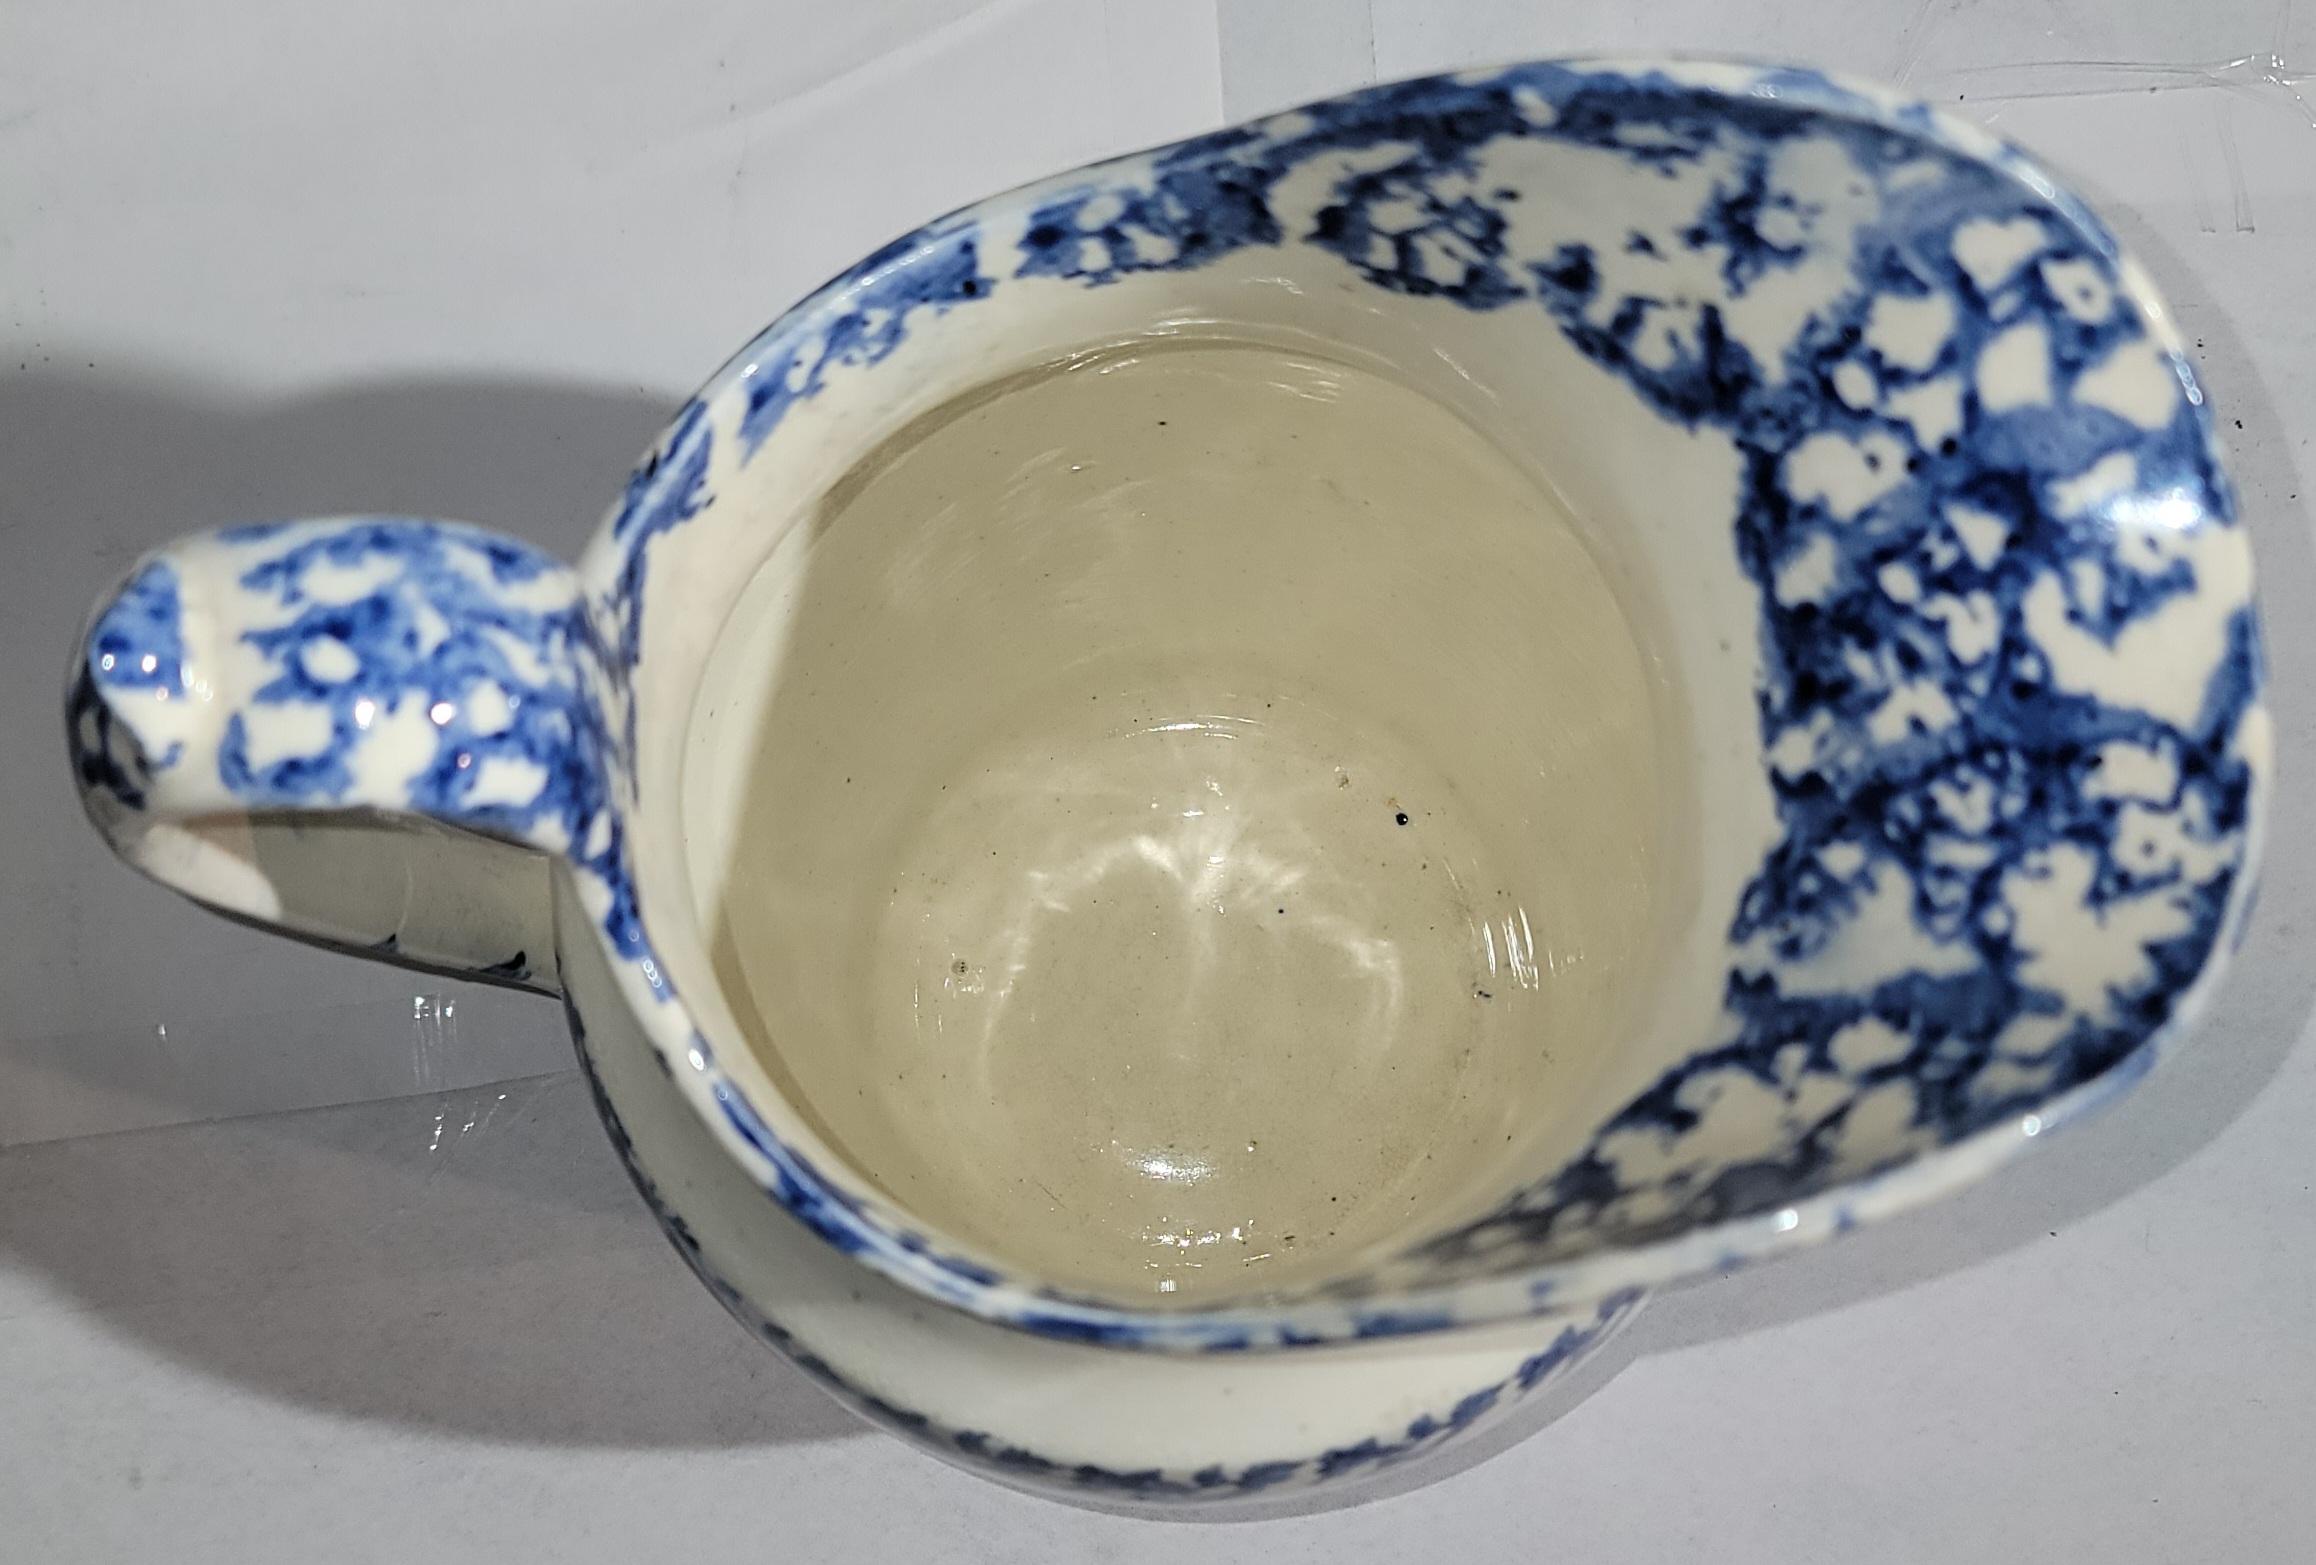 This fine 19thc soft paste (similar to a lighter ironstone pottery ) in pristine condition. This fine sponge patterned water pitcher is in fine condition.